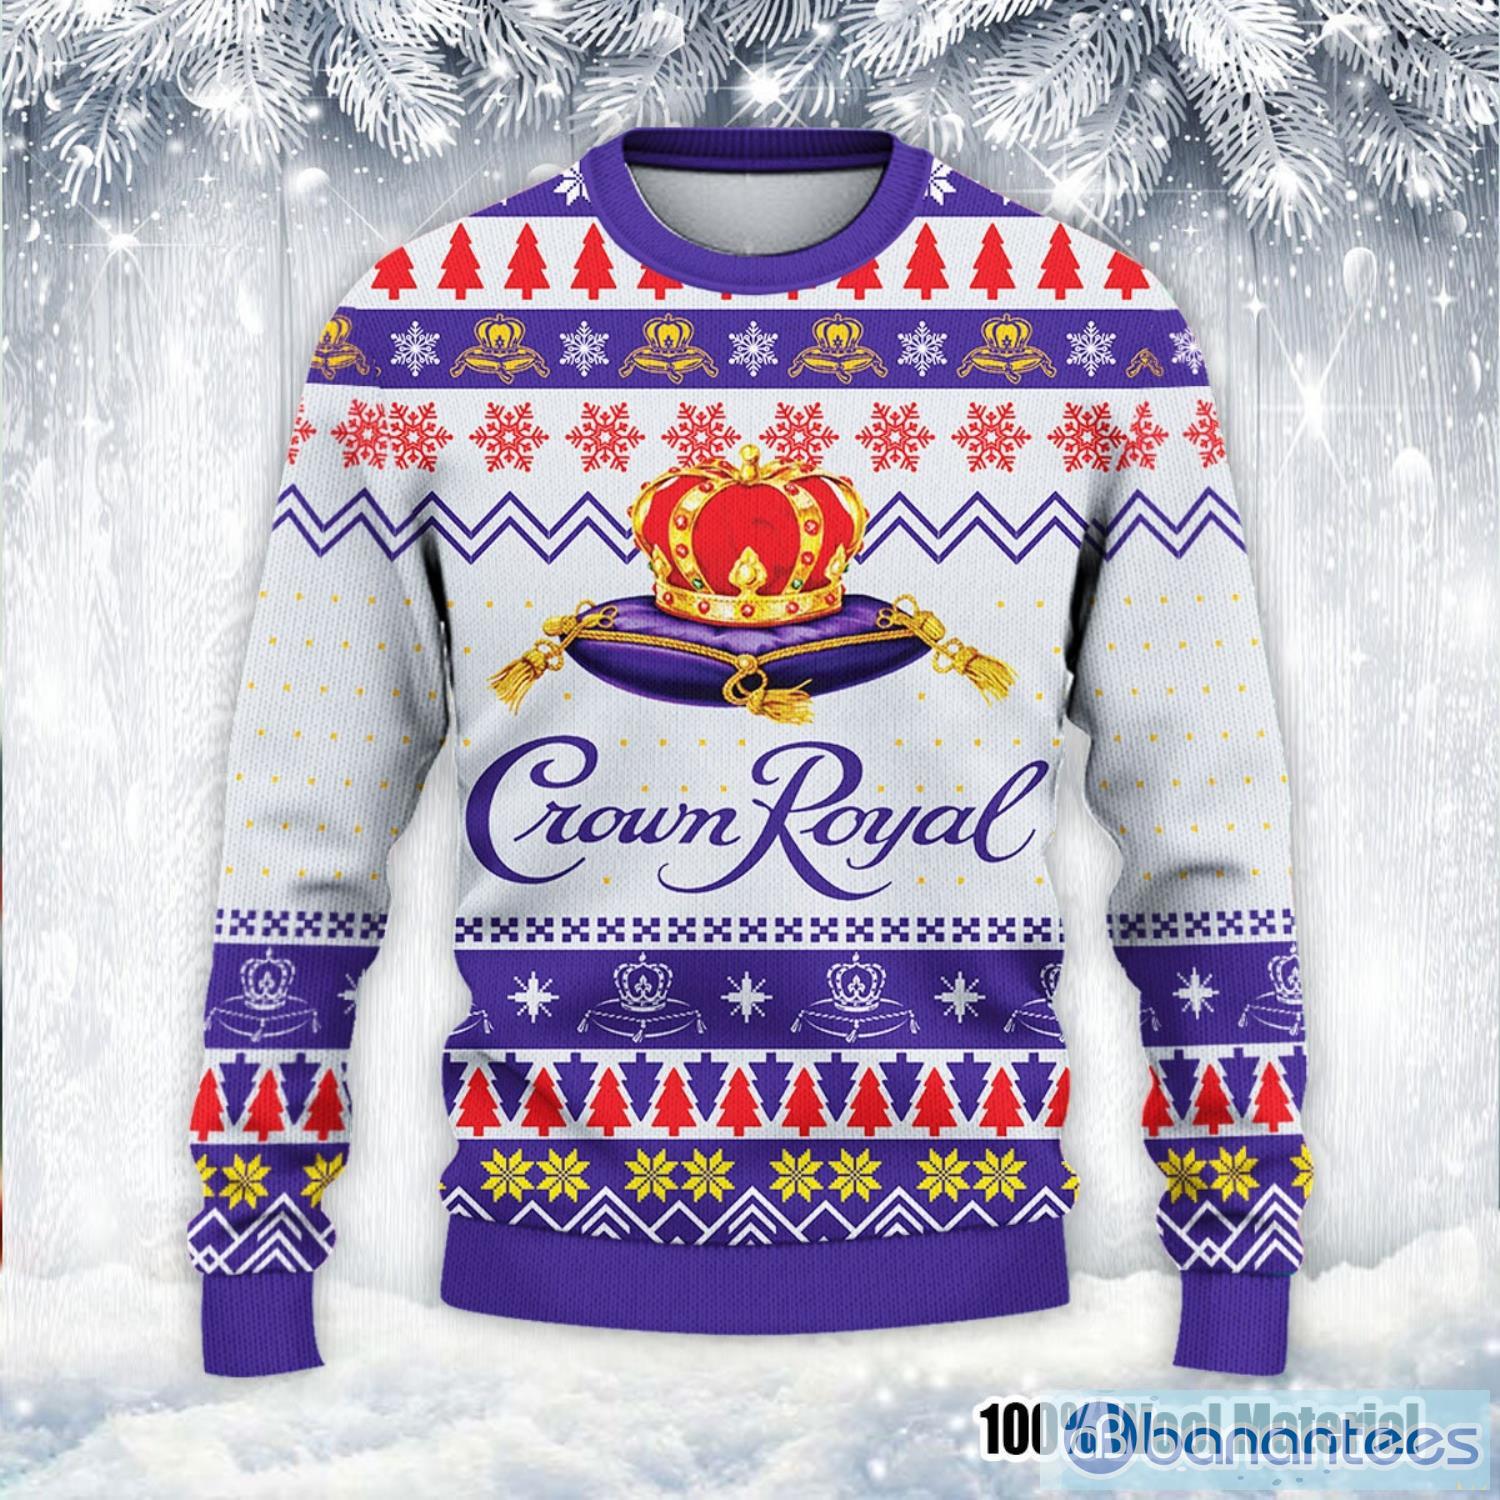 Crown Royal Whiskey Ugly Christmas Sweater Crown Royal Whiskey Christmas Sweater Product Photo 2